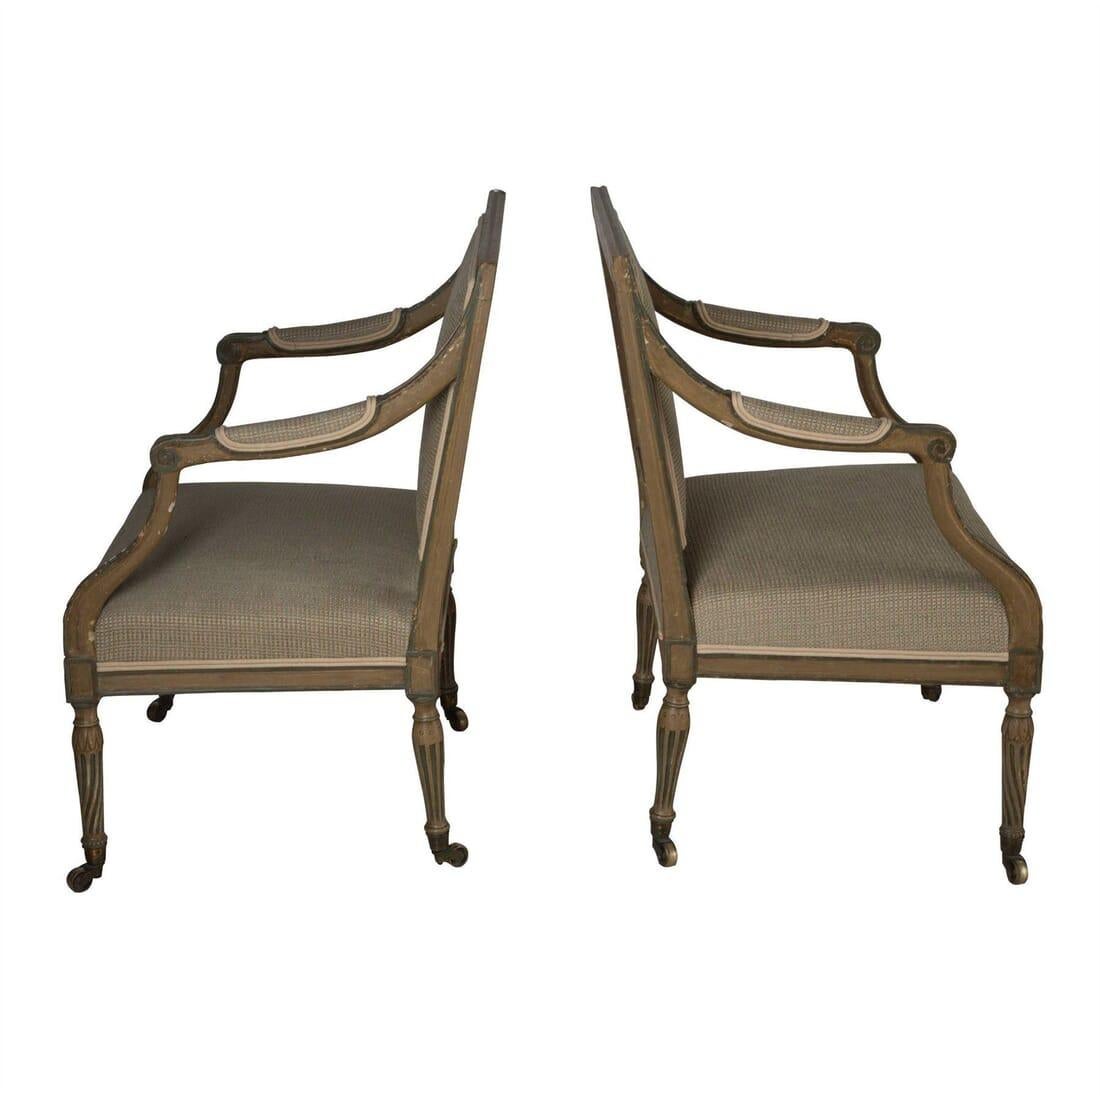 Handsome and well drawn pair of English fauteuils in Louis XVI style, circa 1810. Old paint, but not original. Seat height 43cm, seat depth 51cm.